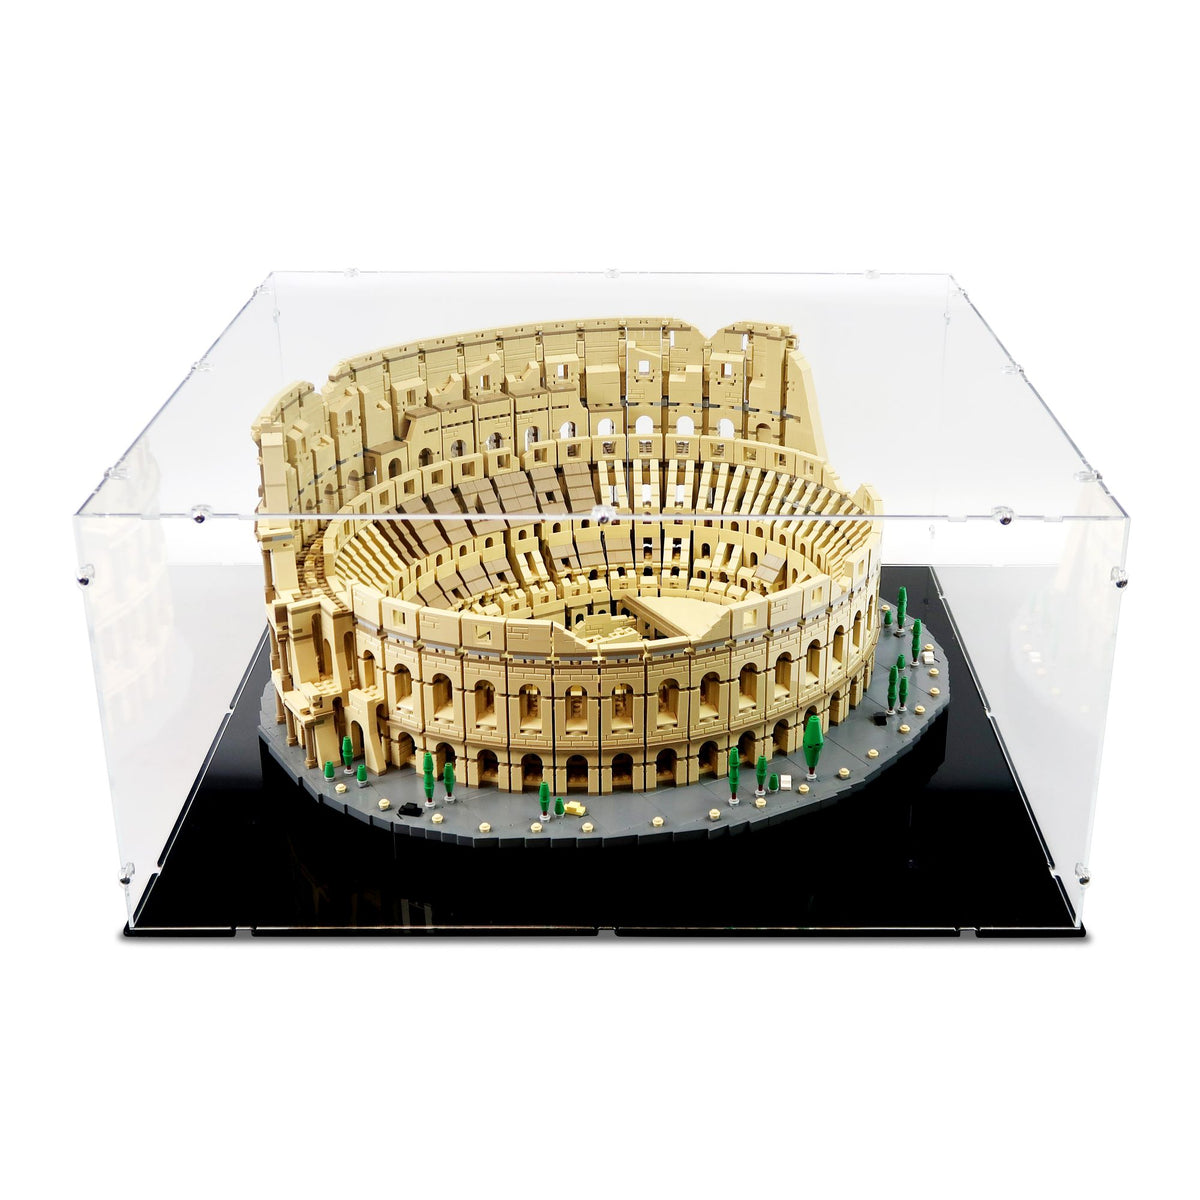 Display King Acrylic display case for Lego Colosseum 10276 US STOCK 